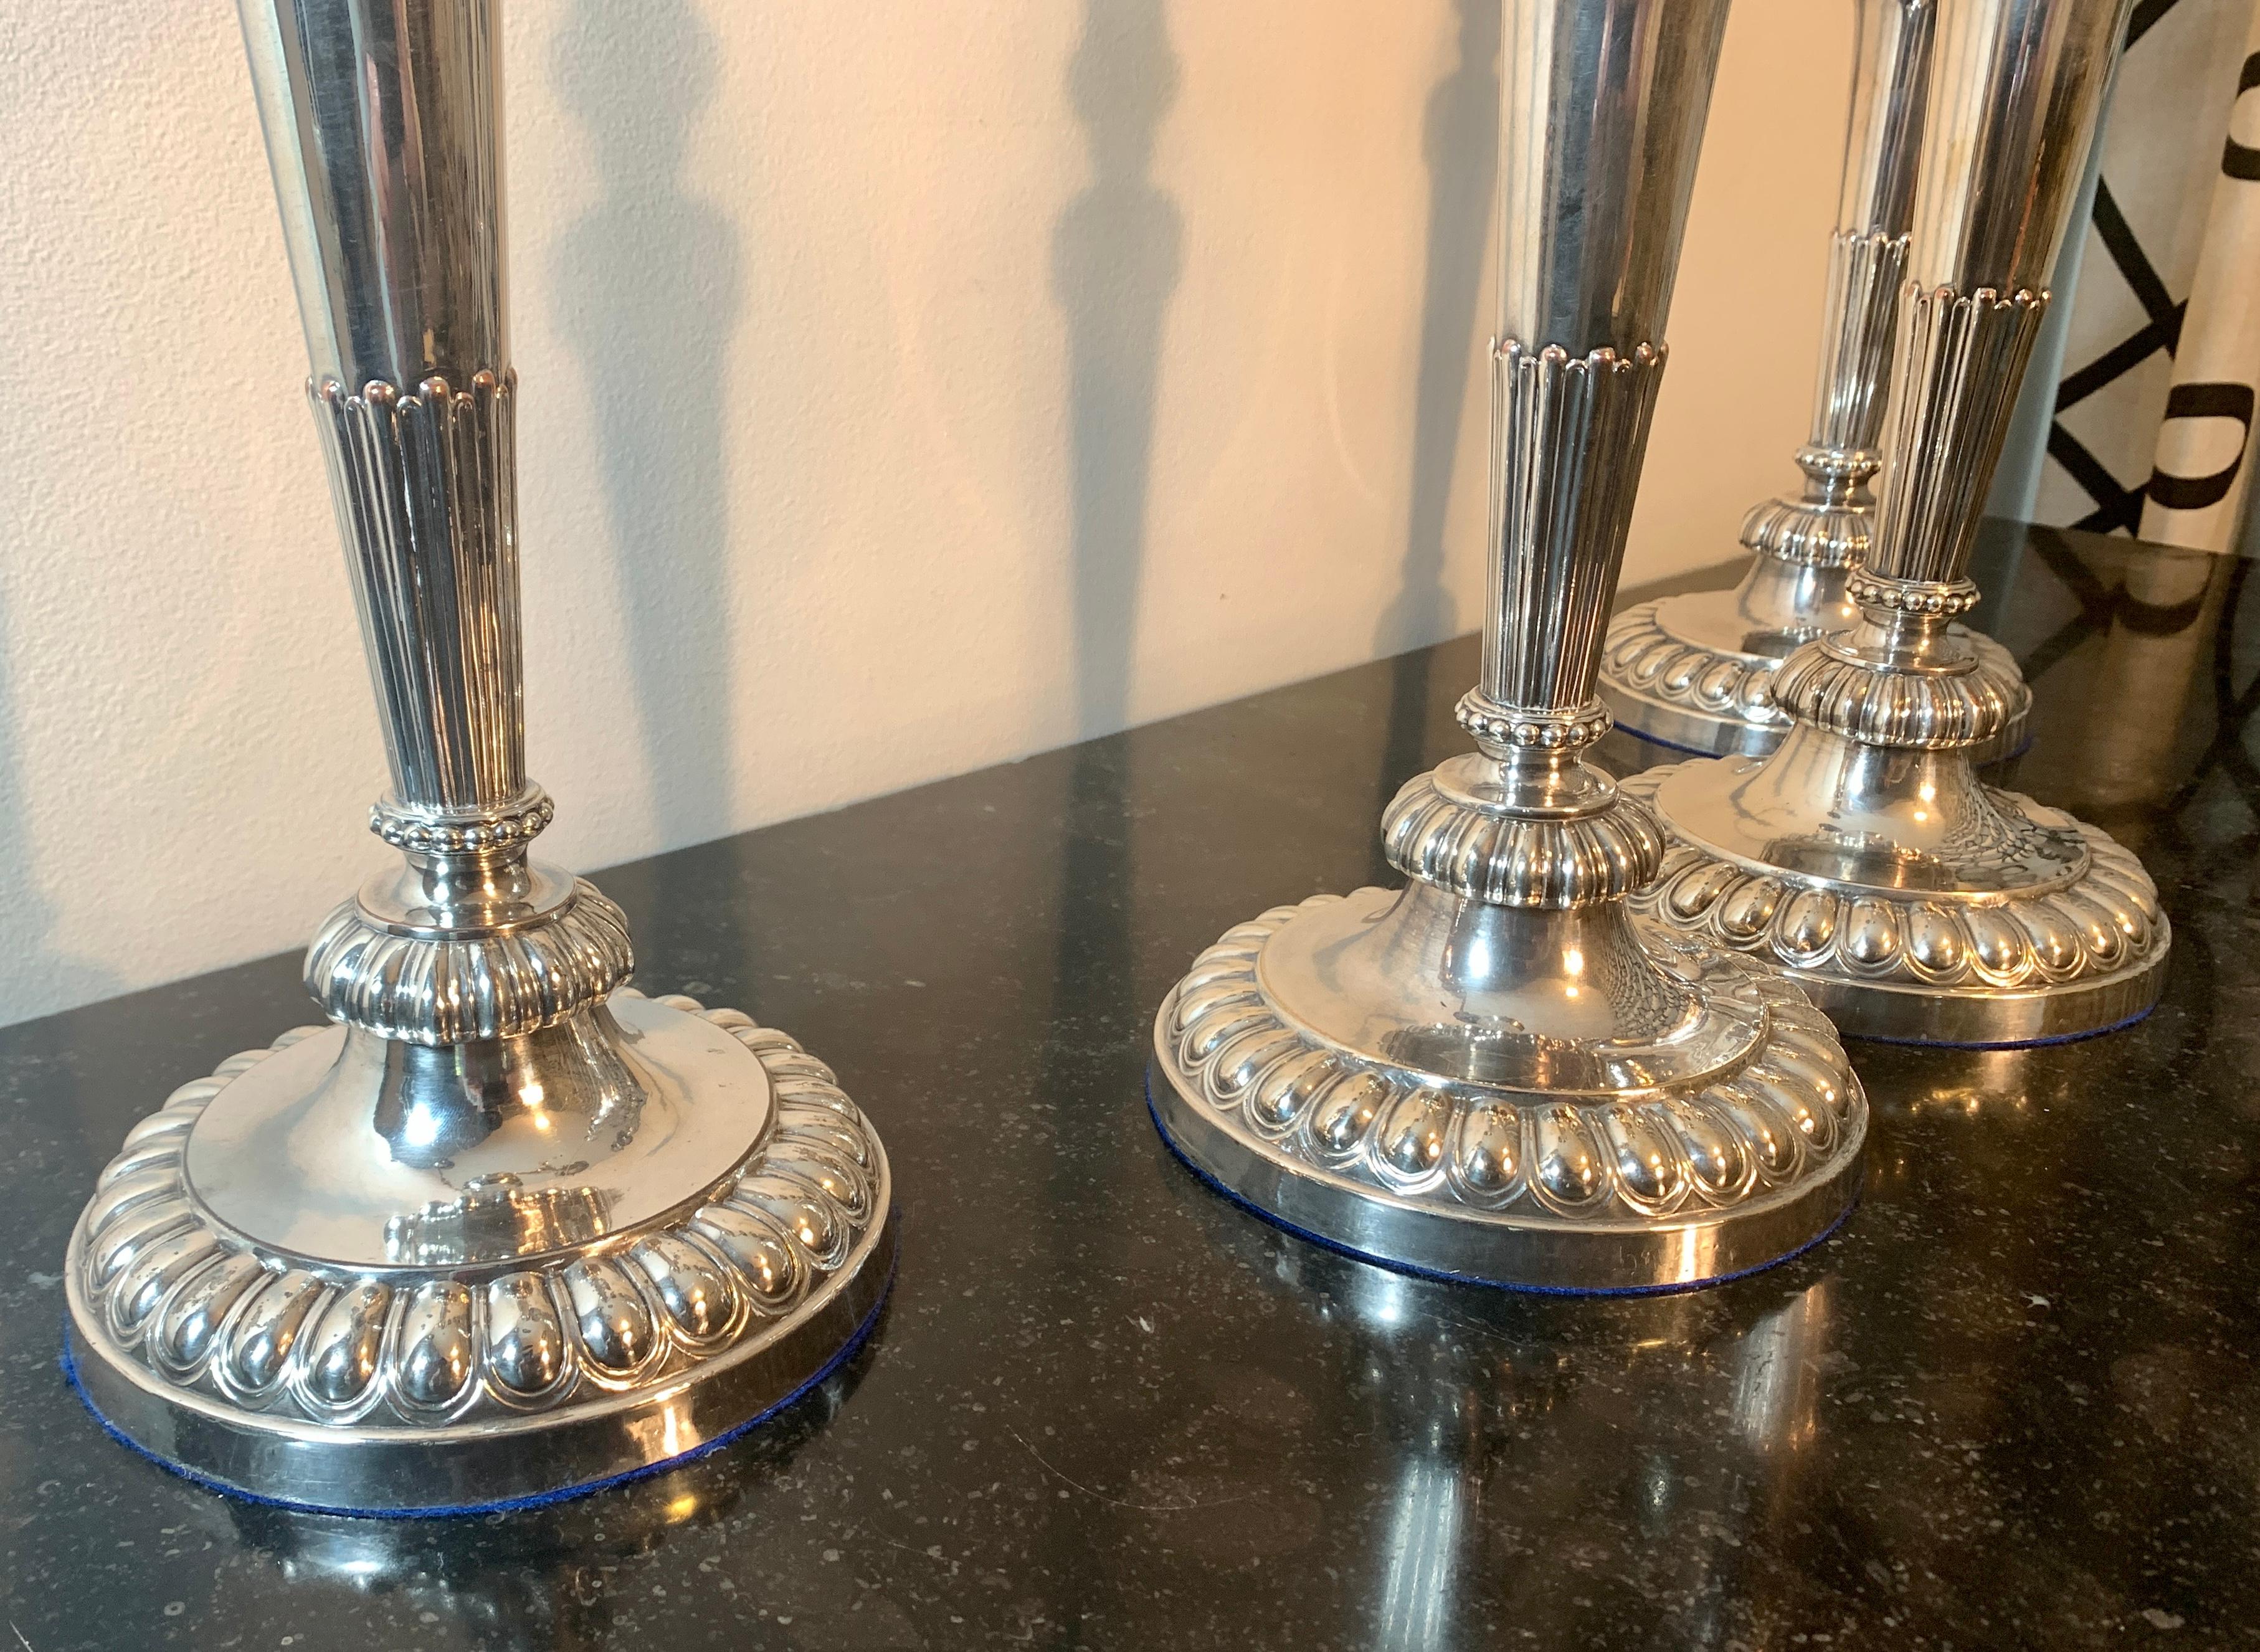 Early 19th Century 1810 Matthew Boulton Sheffield Plate Candelabras & Candlesticks, Set of 4 For Sale